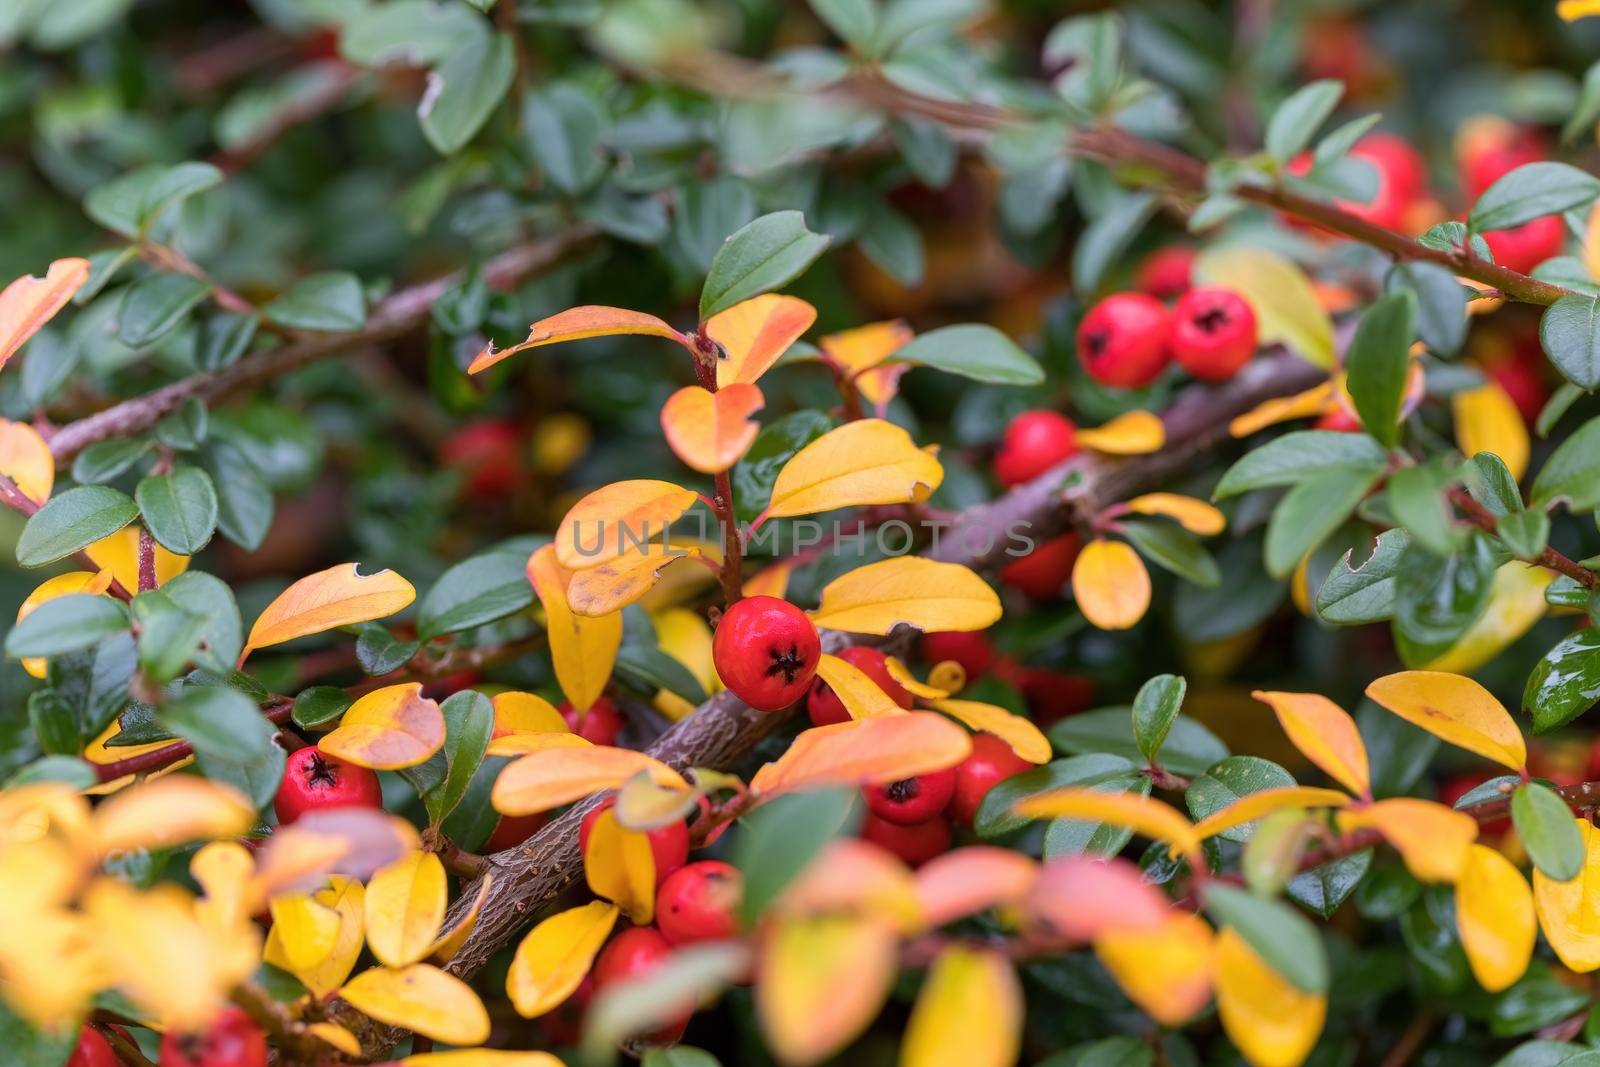 red gaultheria berries in autumn garden in fall season